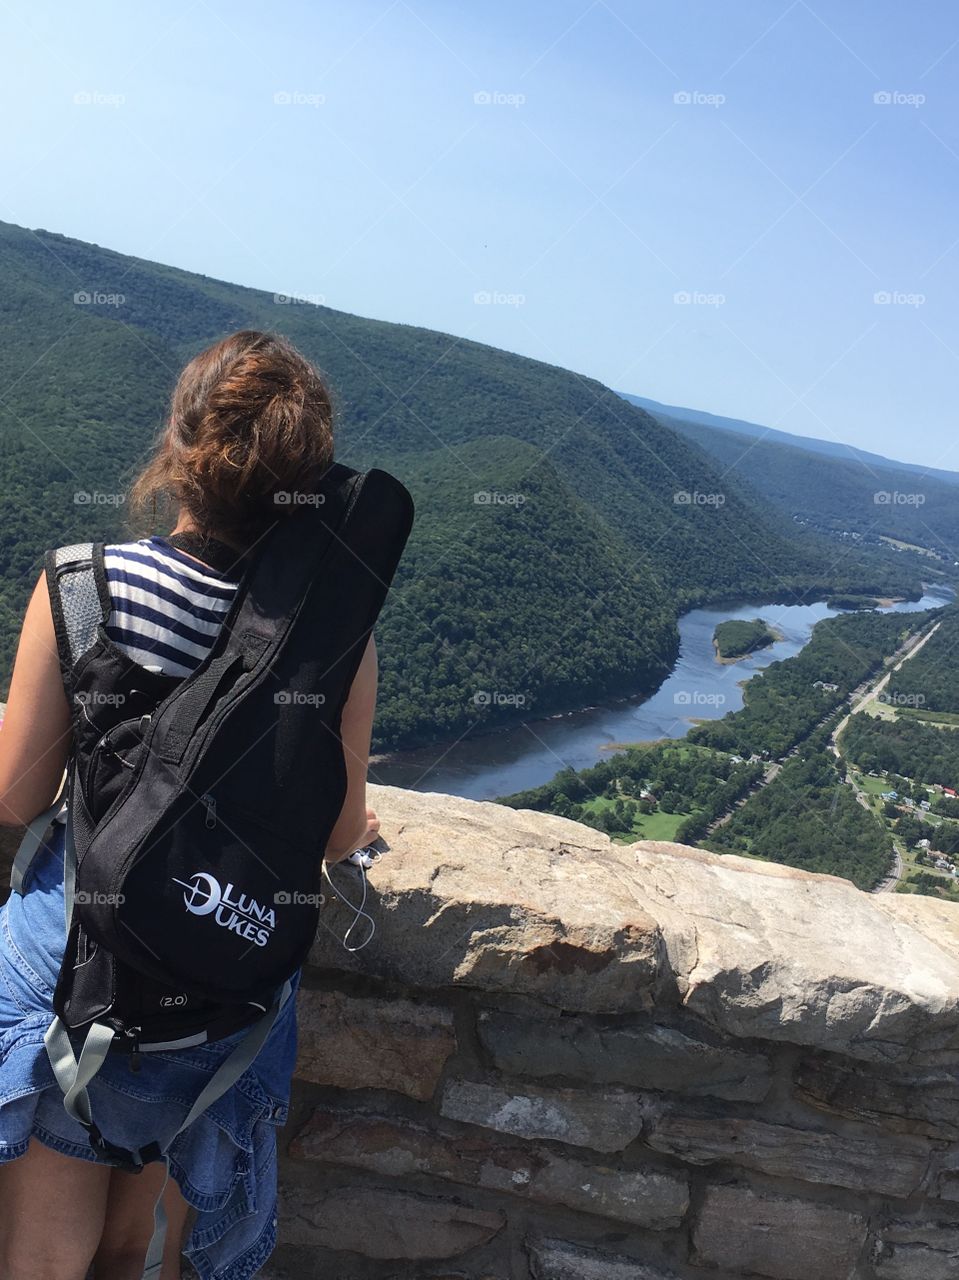 Girl with ukelele strapped to back contemplates river valley from above